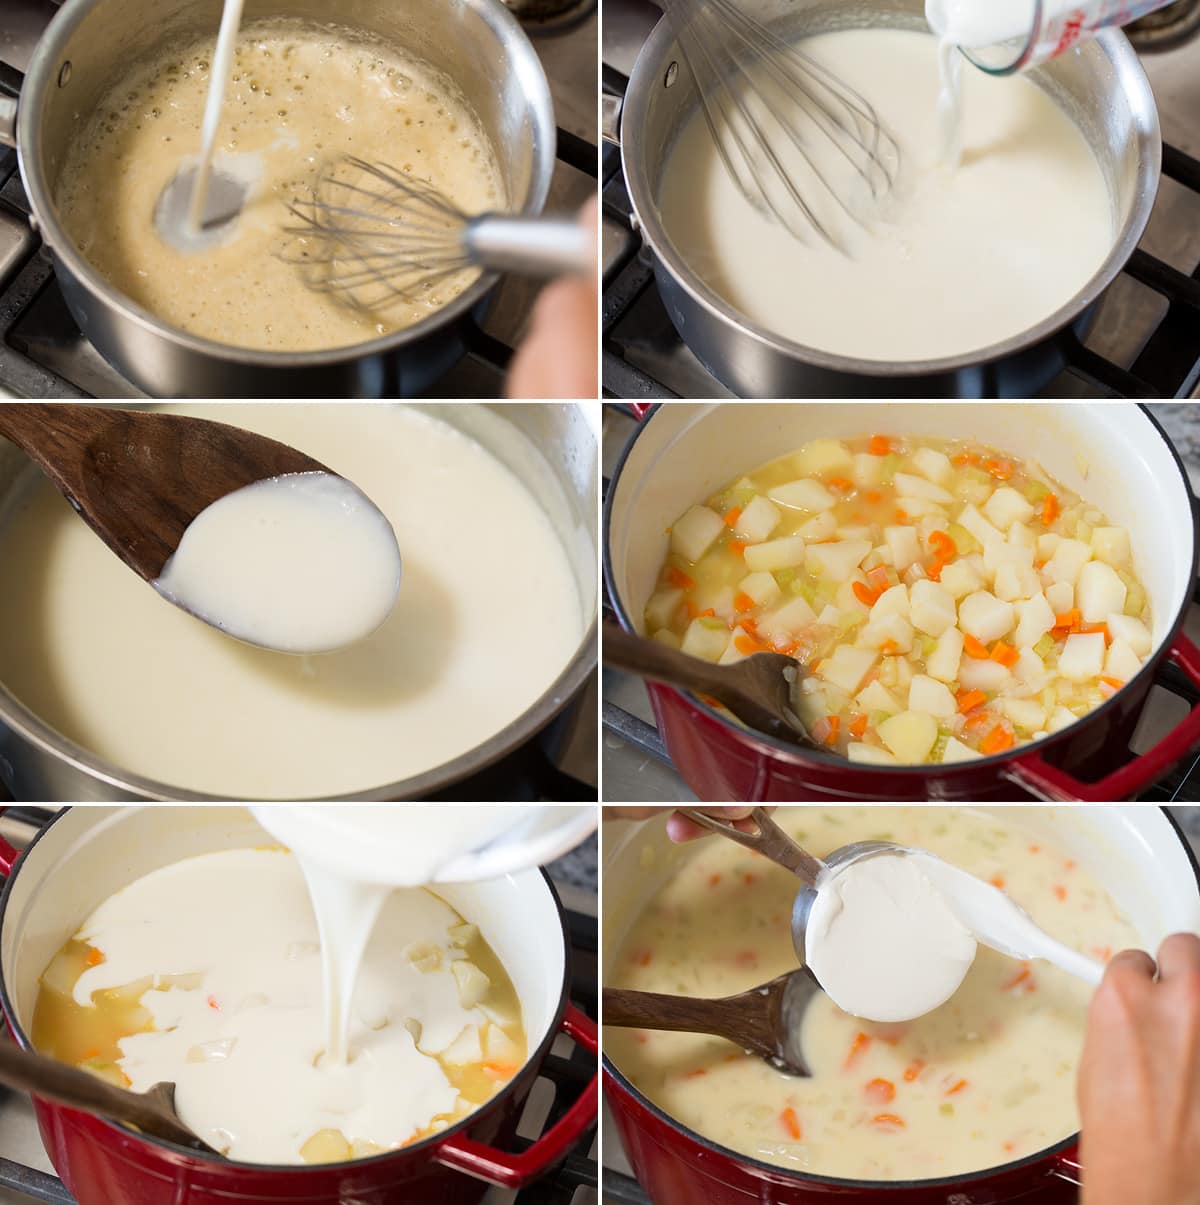 Collage of six images showing continued steps of making potato soup. Includes mixing dairy into roux, then pouring into cooked potato mixture, then finishing with sour cream.